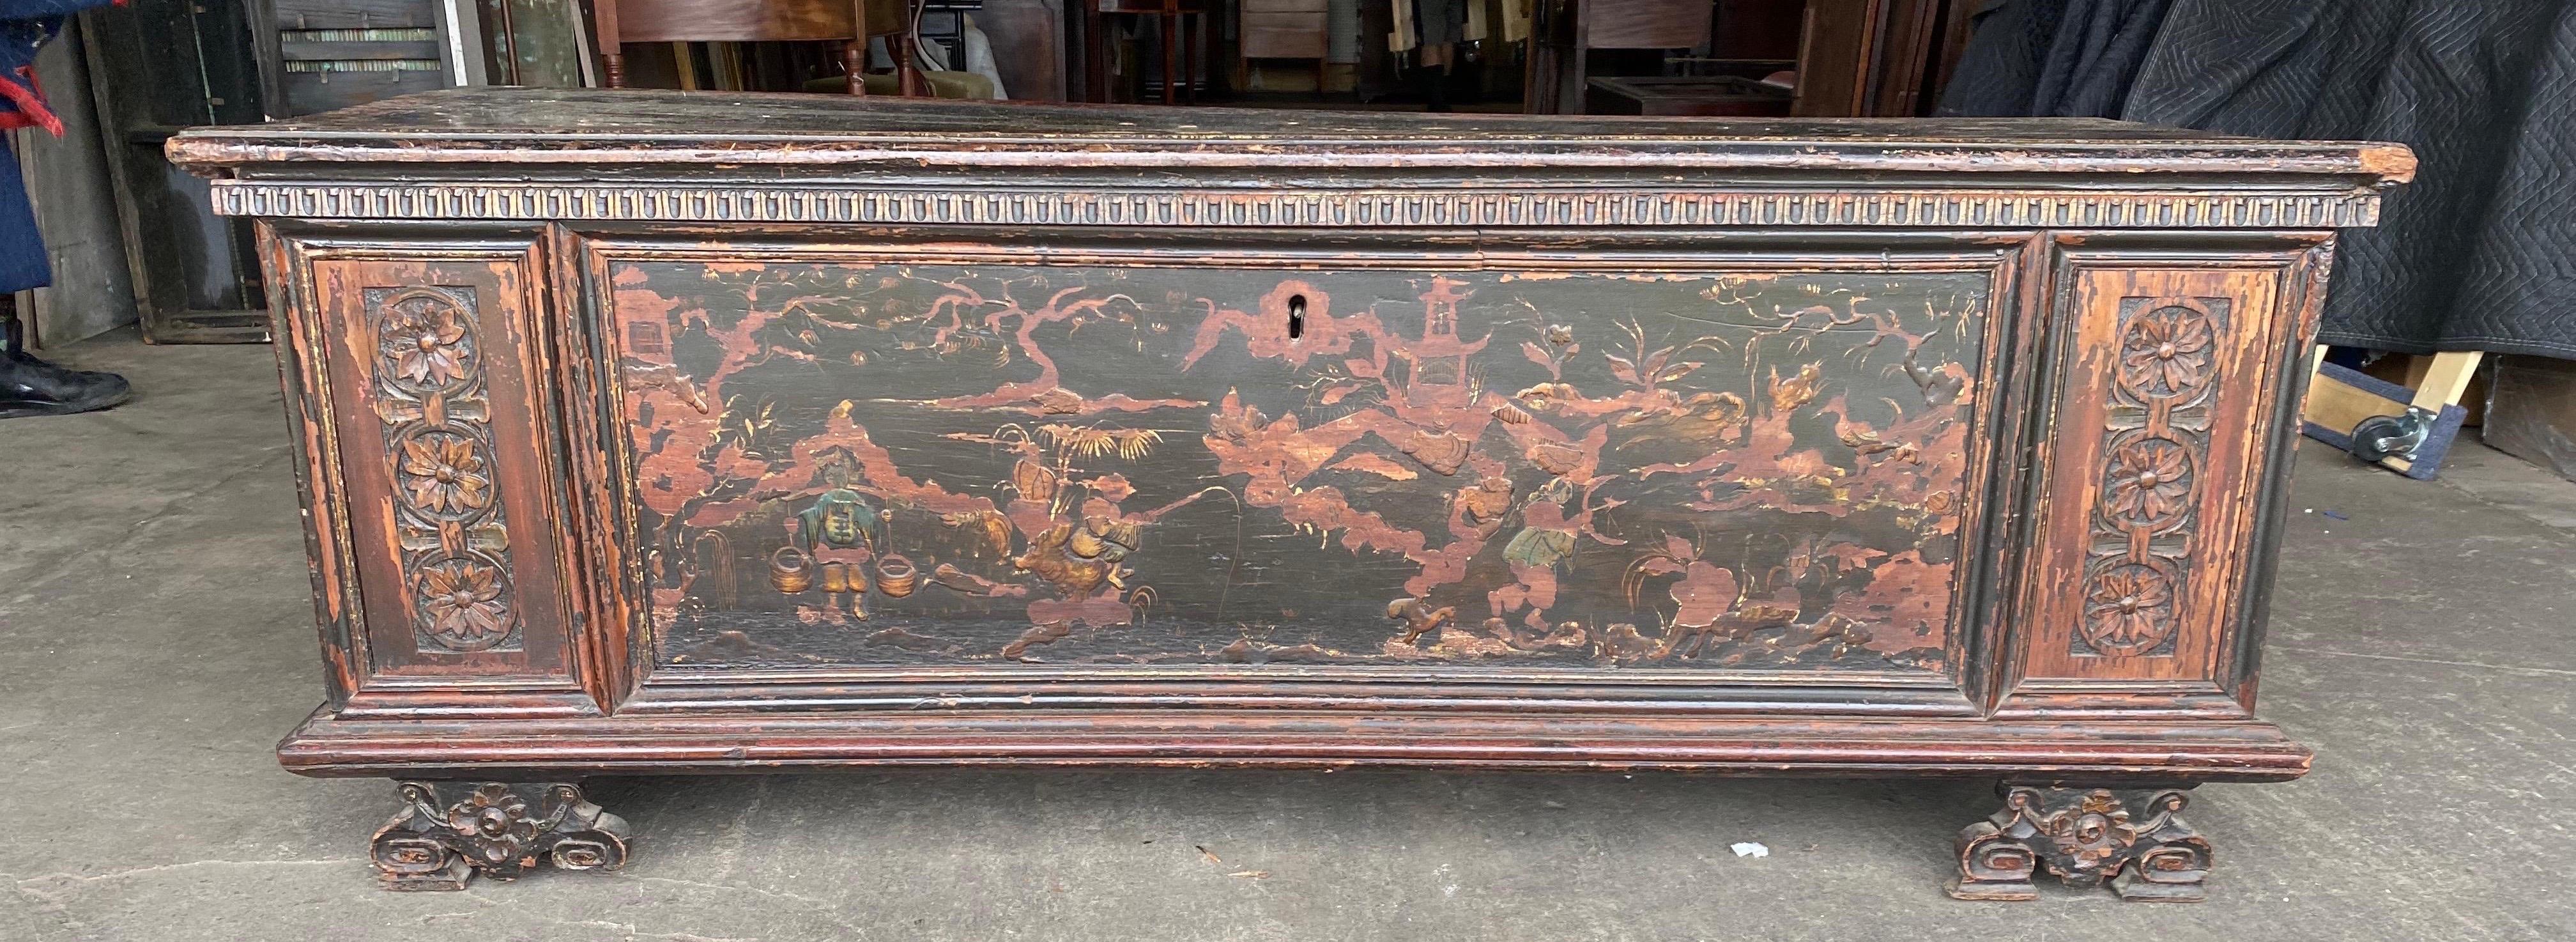 Late 17th- Early 18th Century Italian Cassone with Chinoiserie Decoration For Sale 2